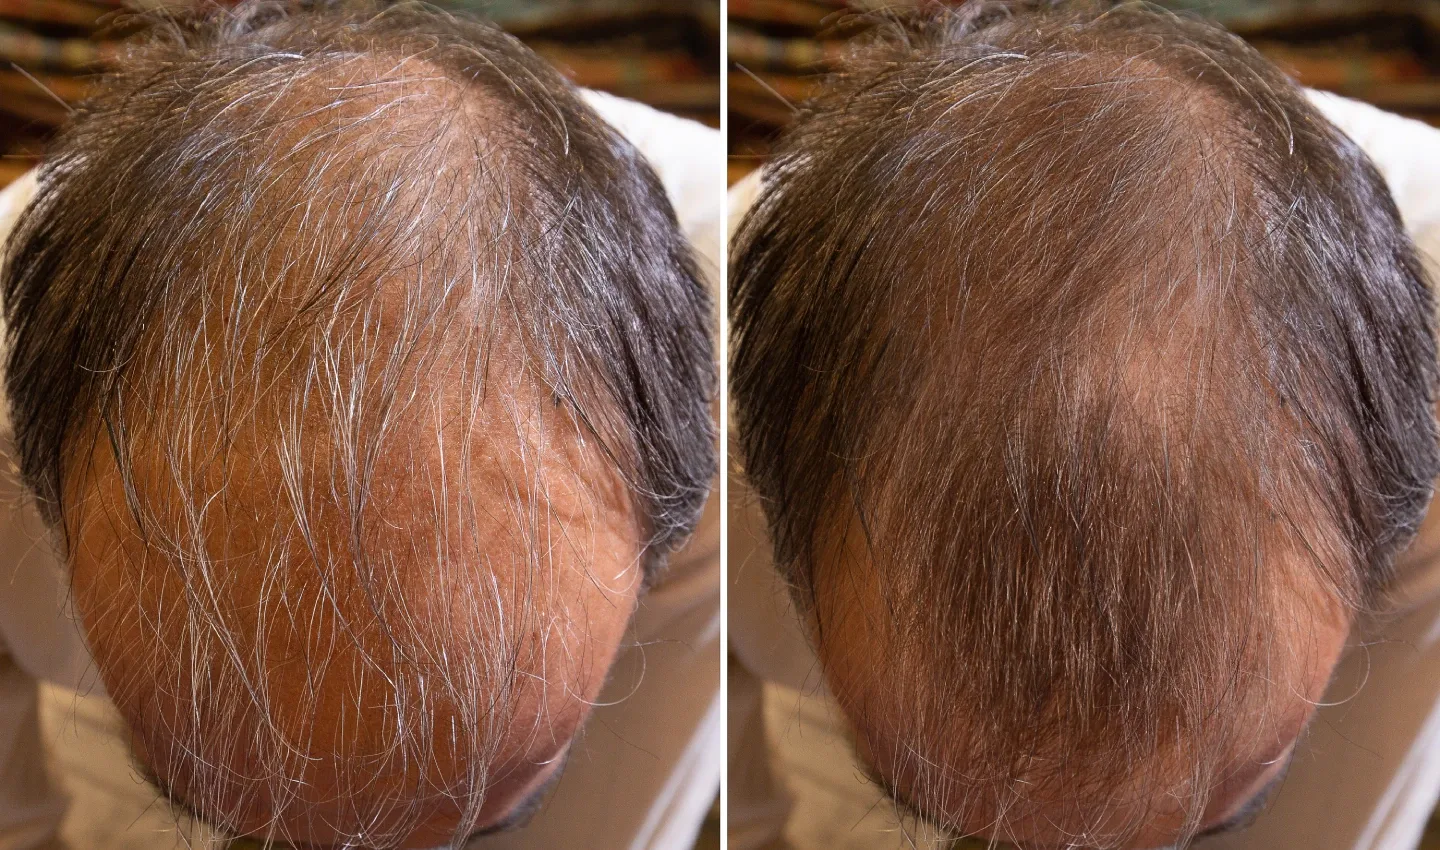 A comparison of before and after photos for non-surgical hair regrowth.